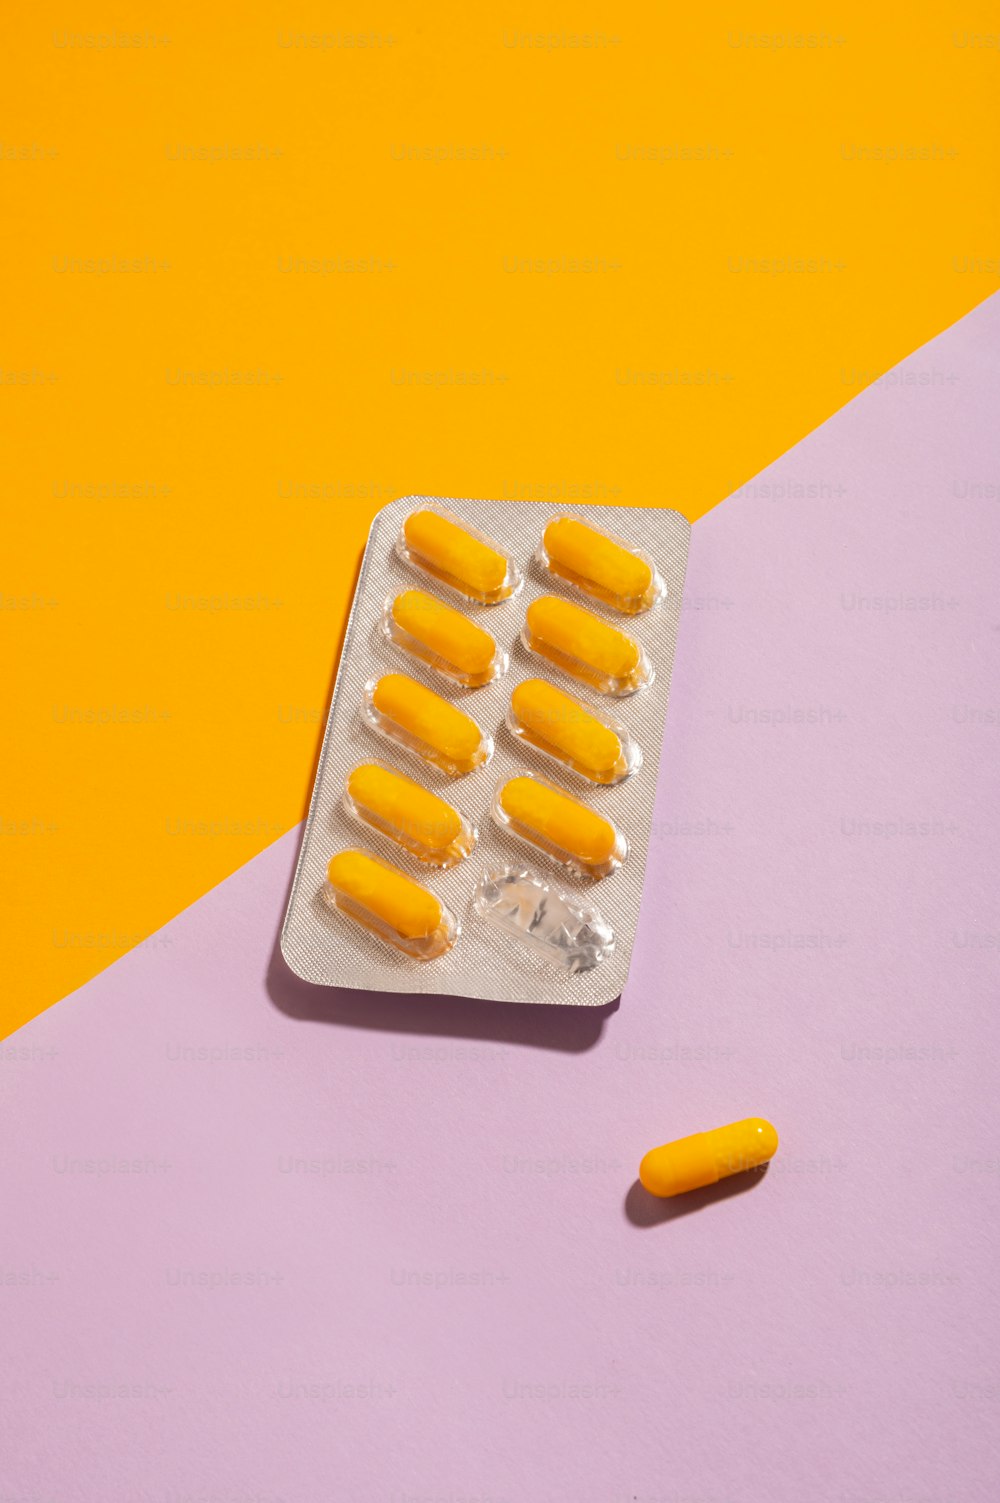 a contraption filled with yellow pills on a pink and yellow background